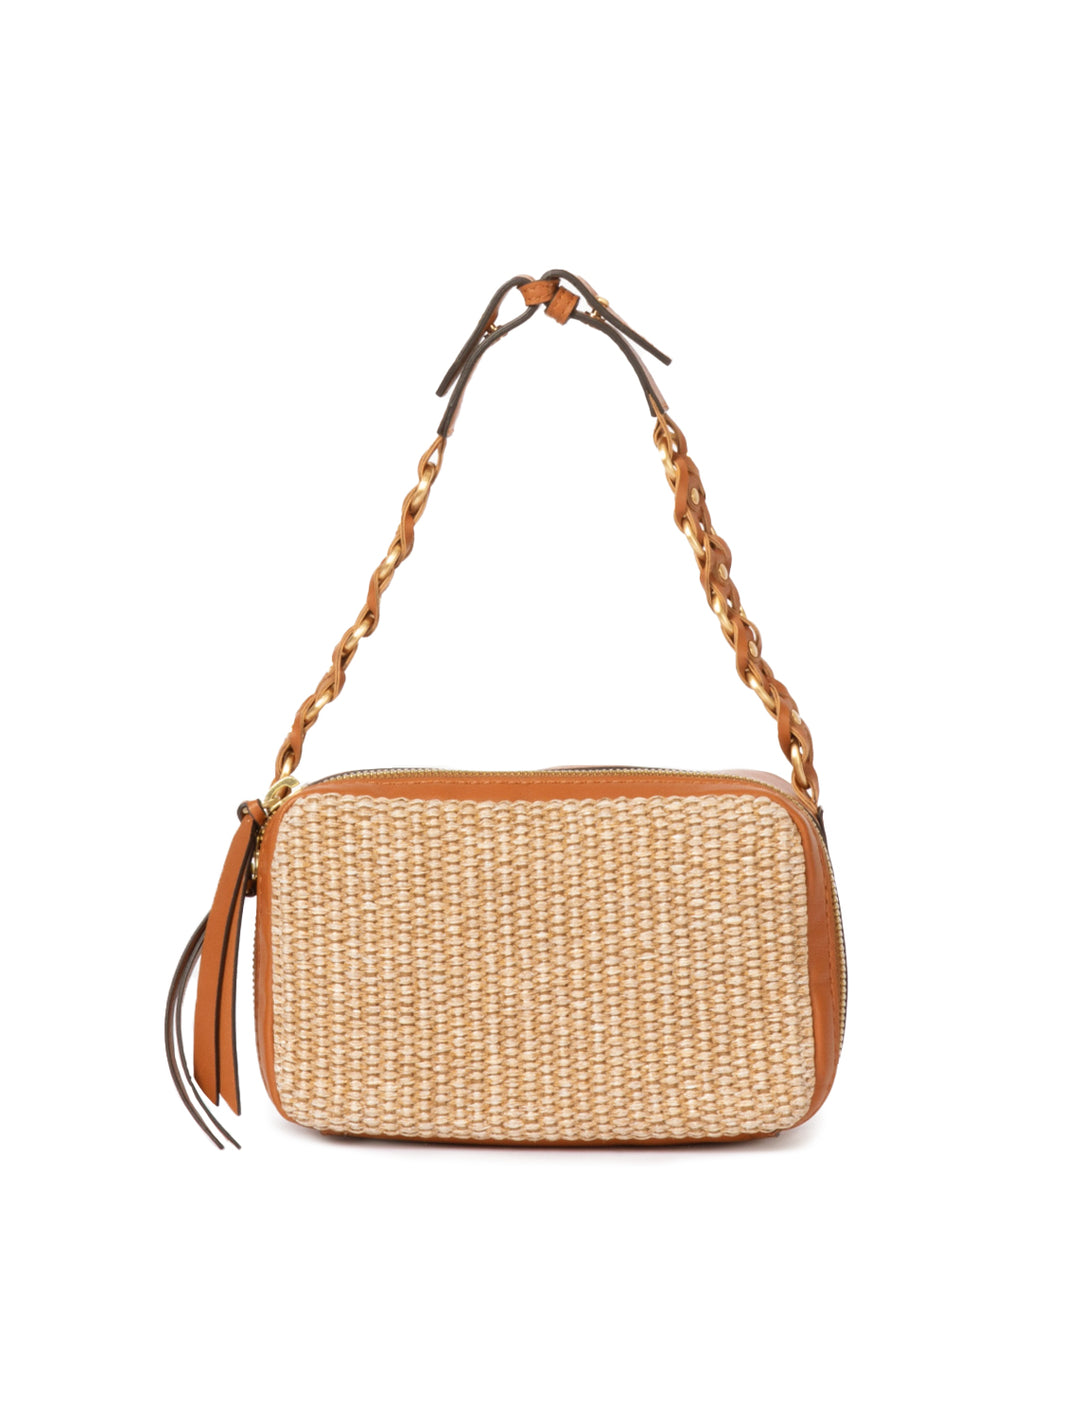 Front view of Rag & Bone's cami straw cameral bag in natural.